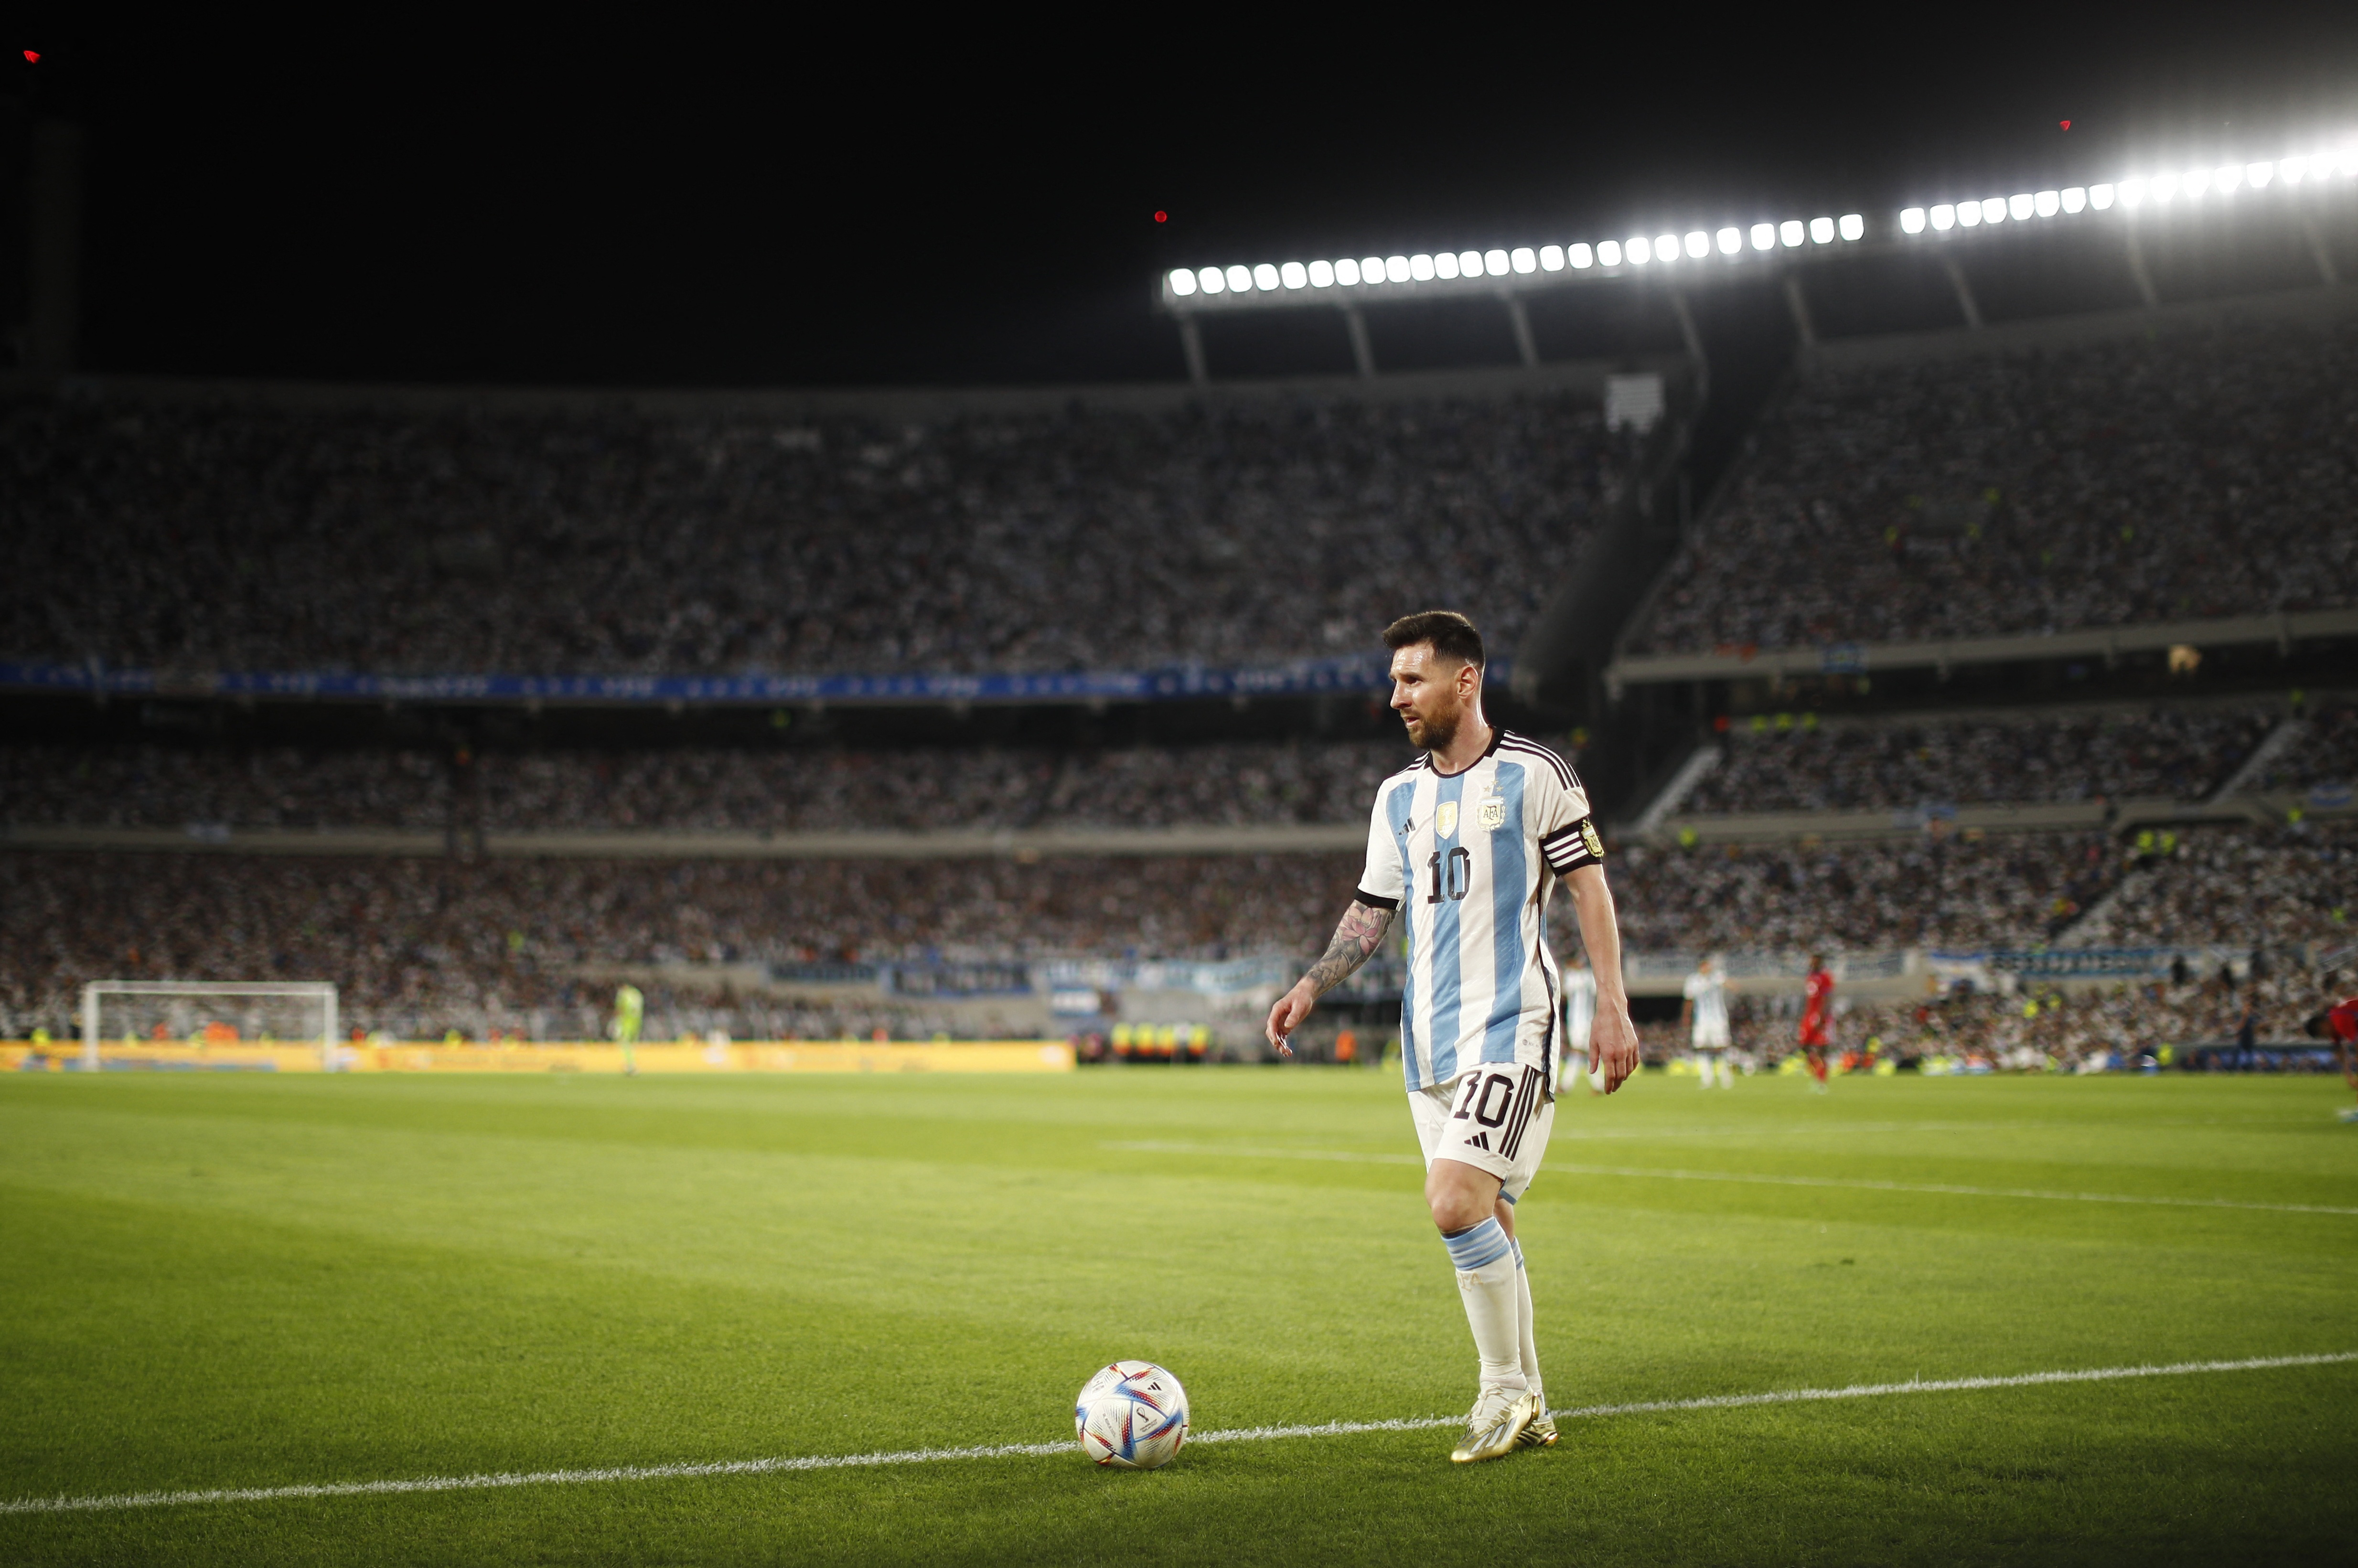 Lionel Messi approaches to execute a corner kick and for the umpteenth time he stole the applause and ovation of the people